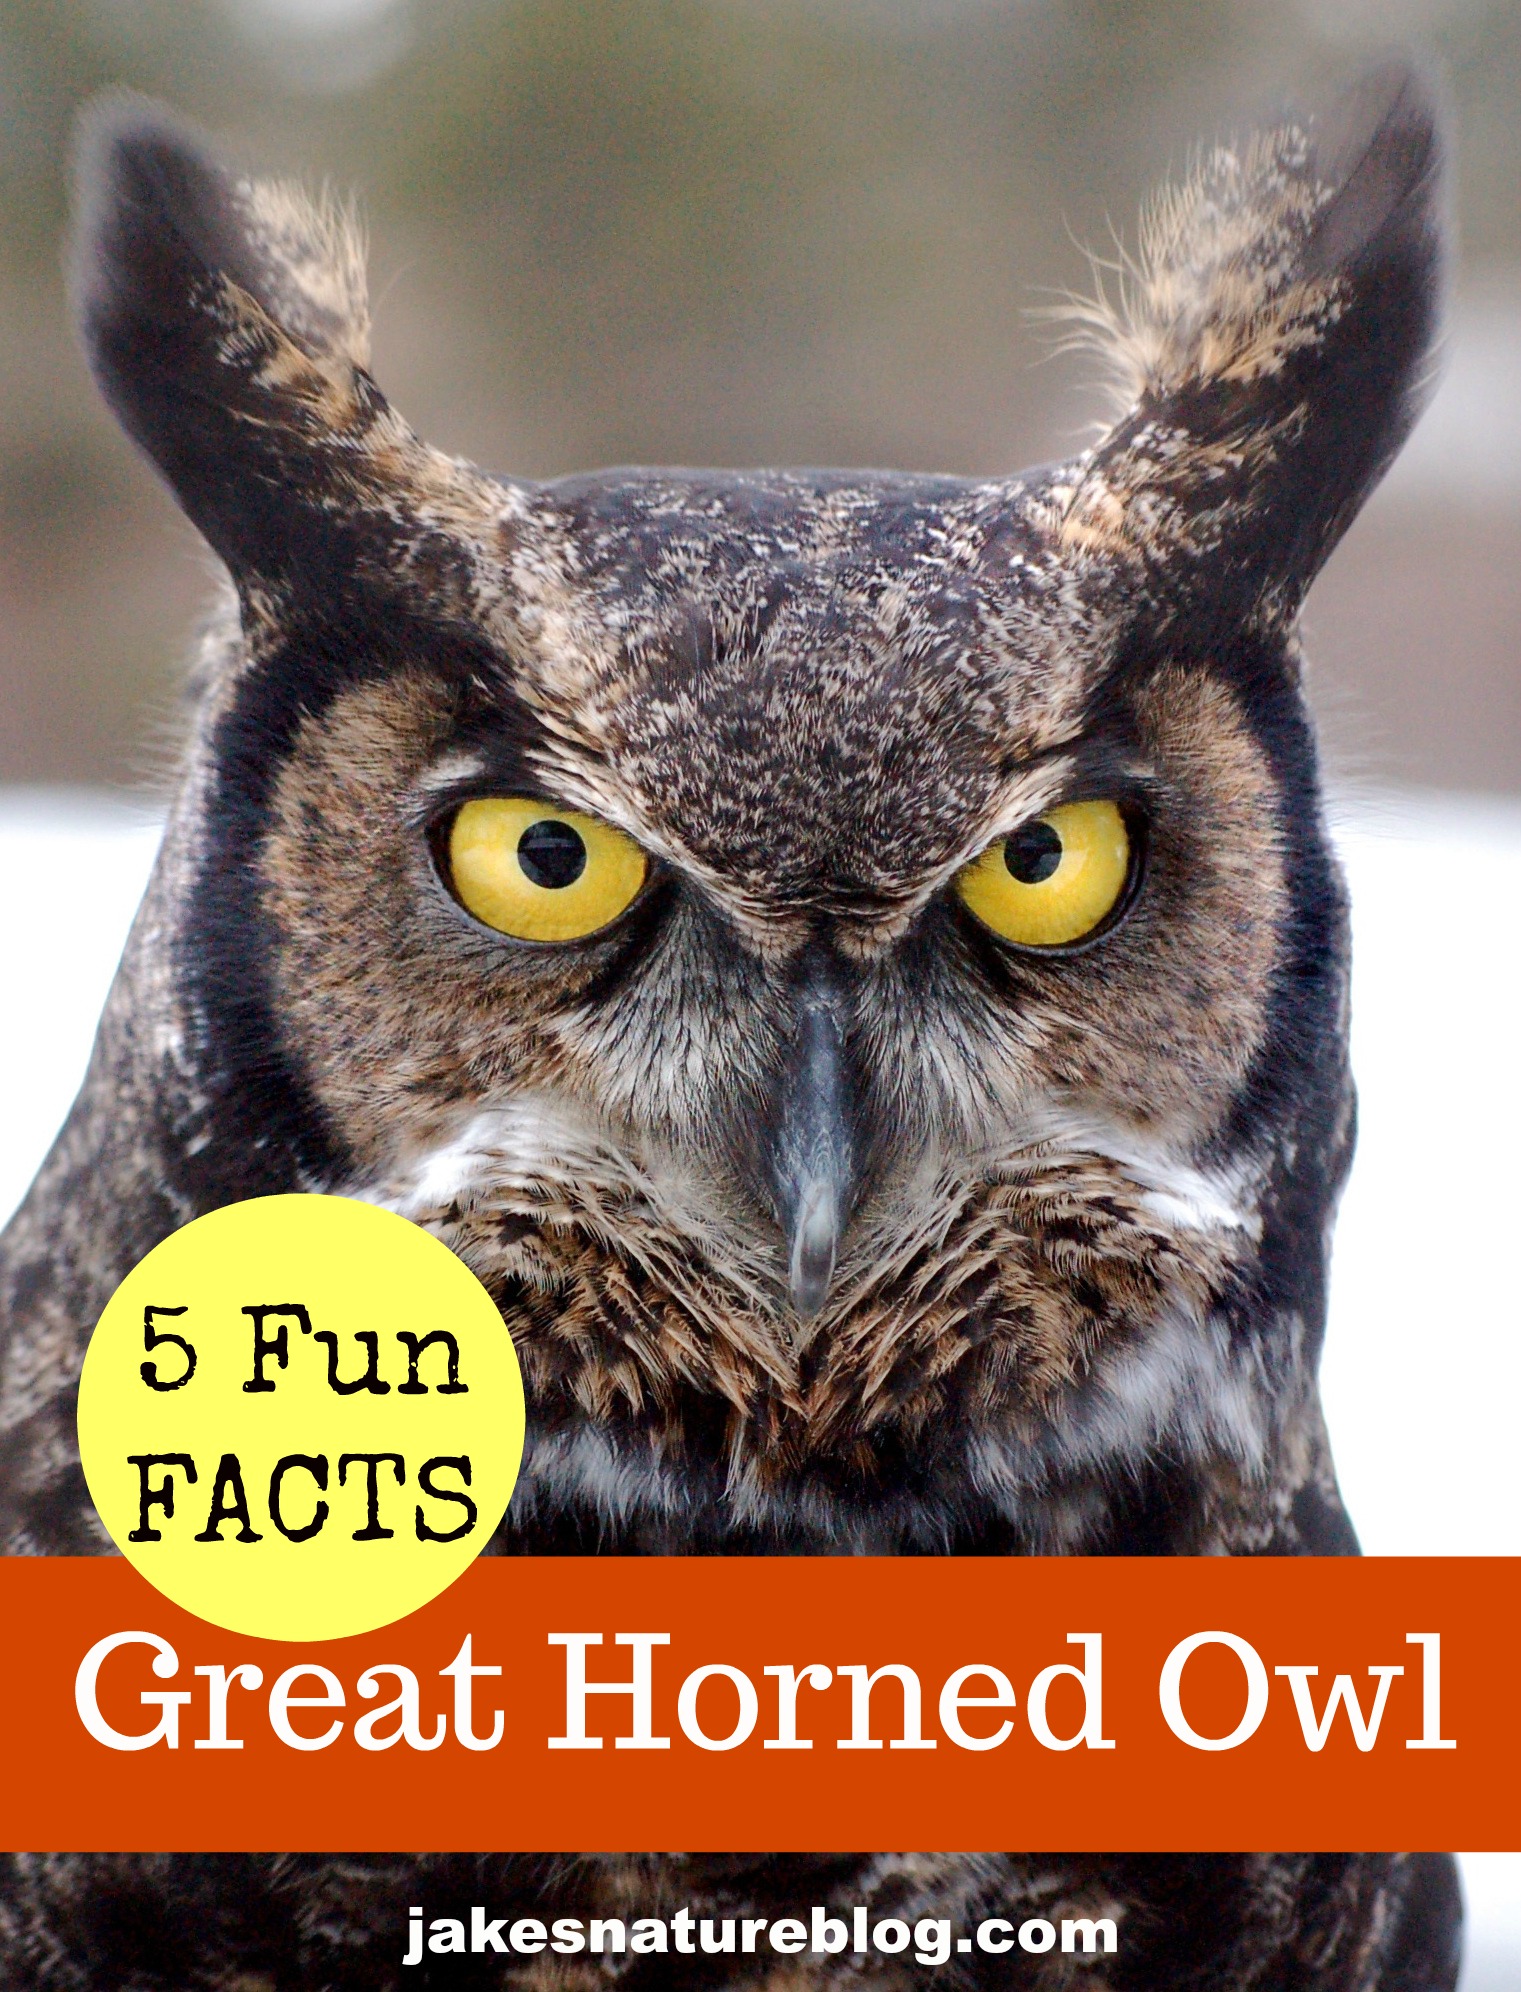 5 Facts About The Great Horned Owl - Including A Winter Baby! - Jake's ...